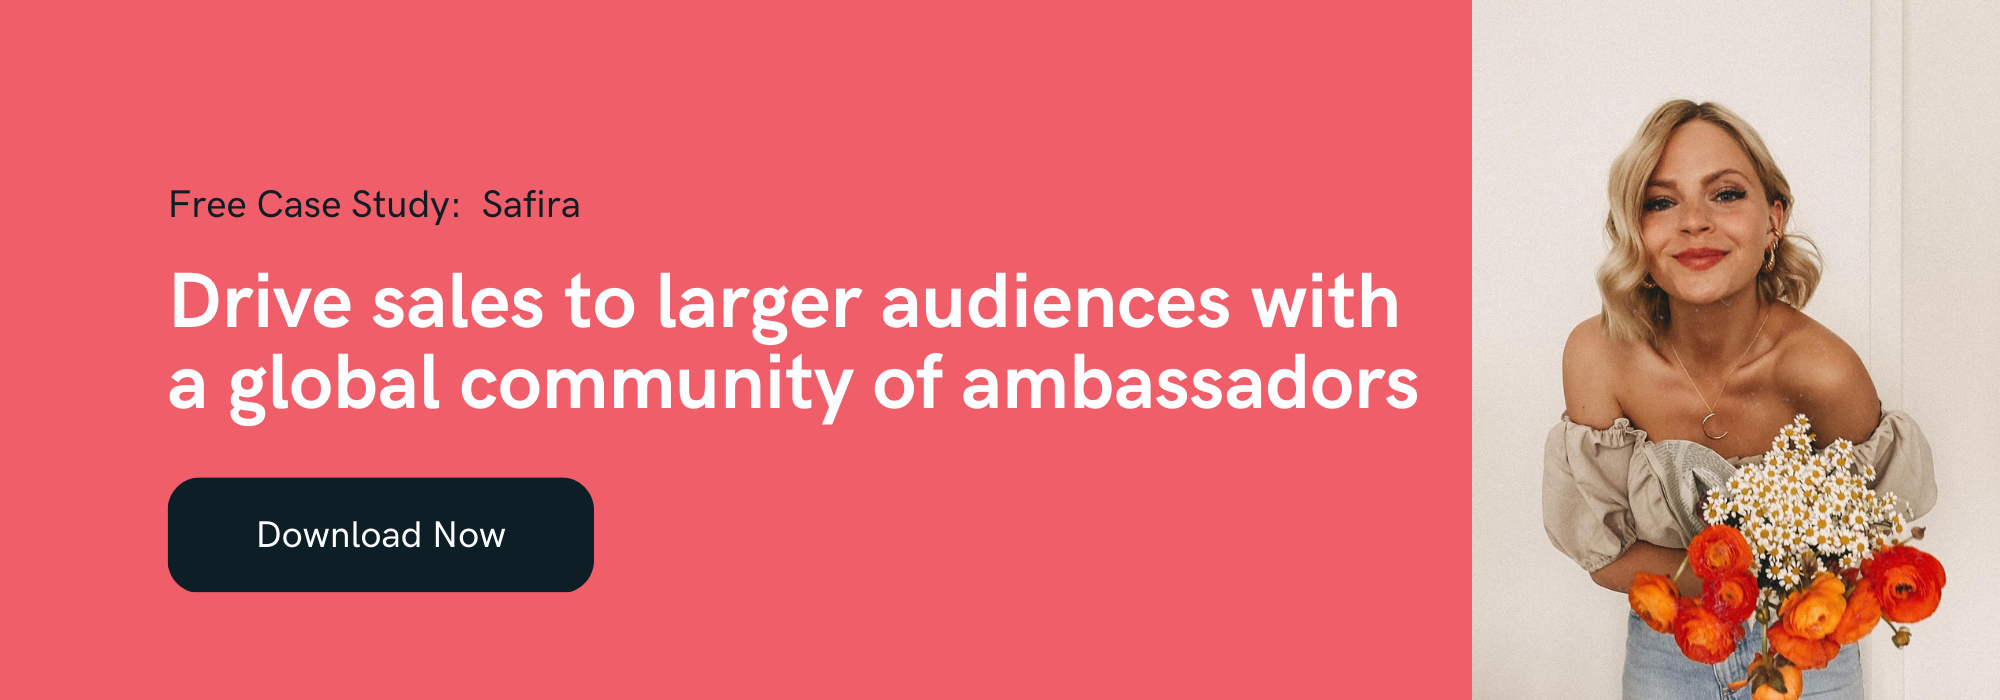 Free case study: Safira. Drive sales to larger audiences with a global community of ambassadors. Download now.